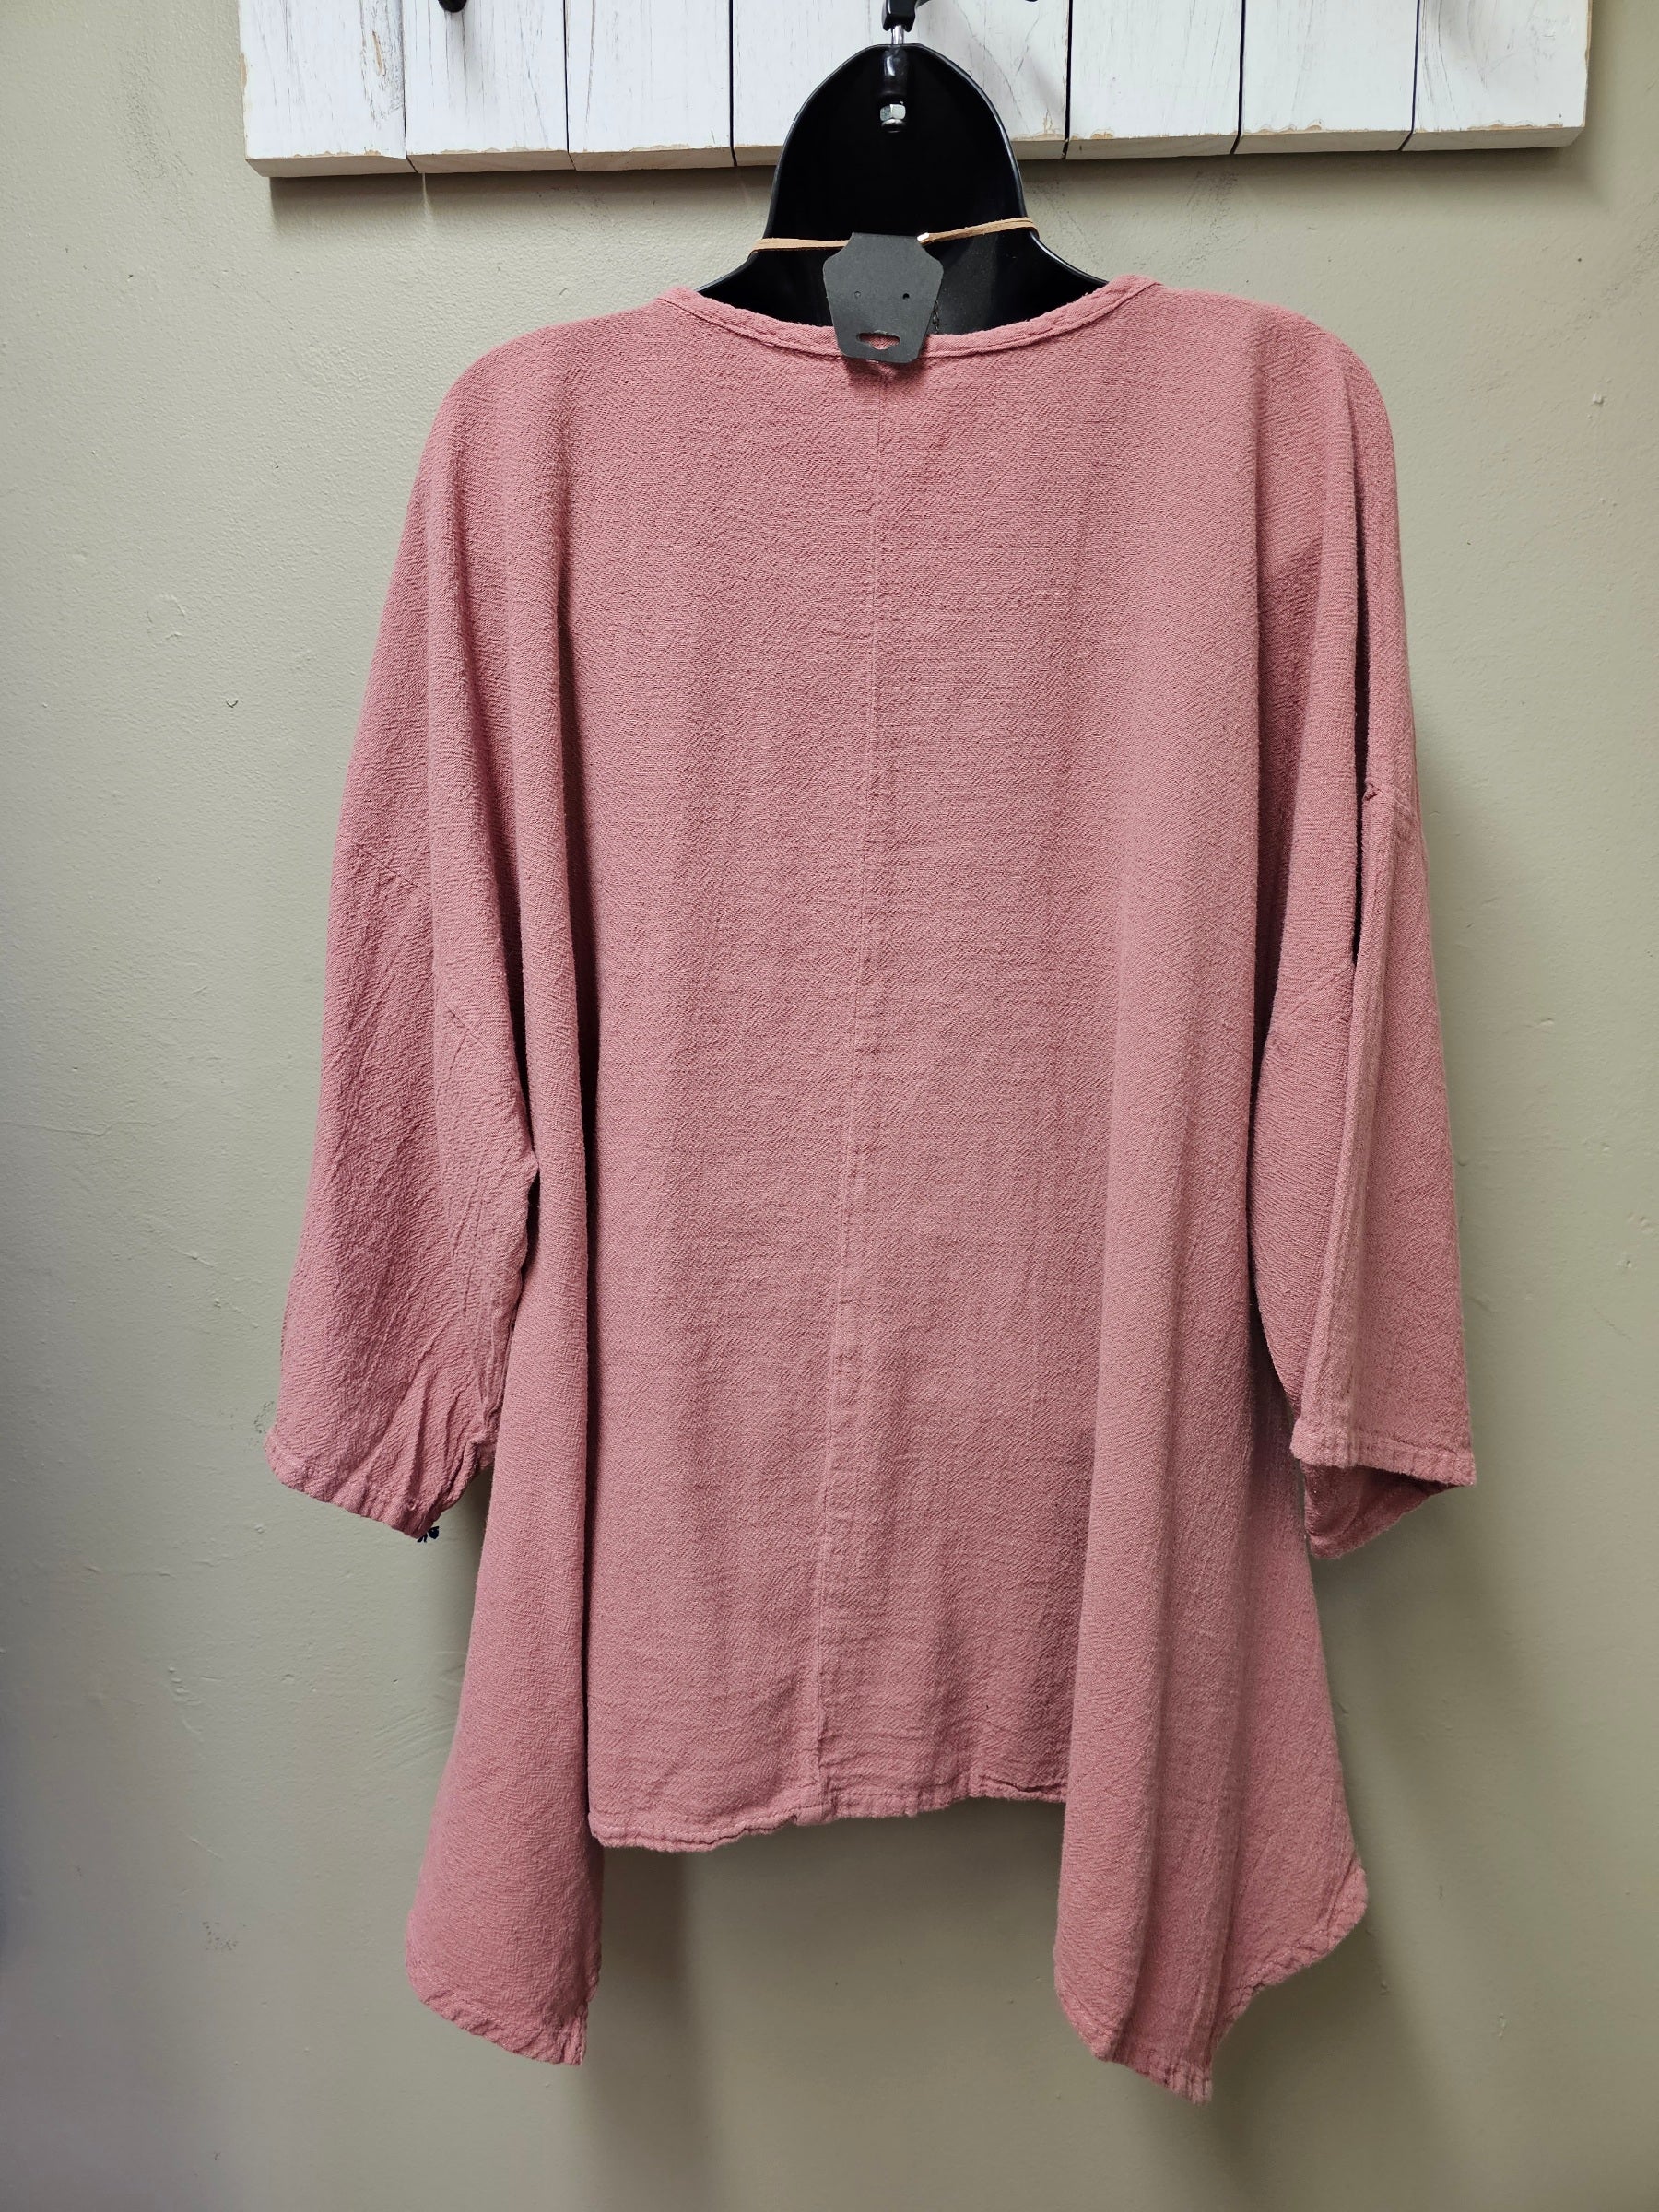 7 Color Ways - Fun Oversized Top with a Loose "Pocket" One Size